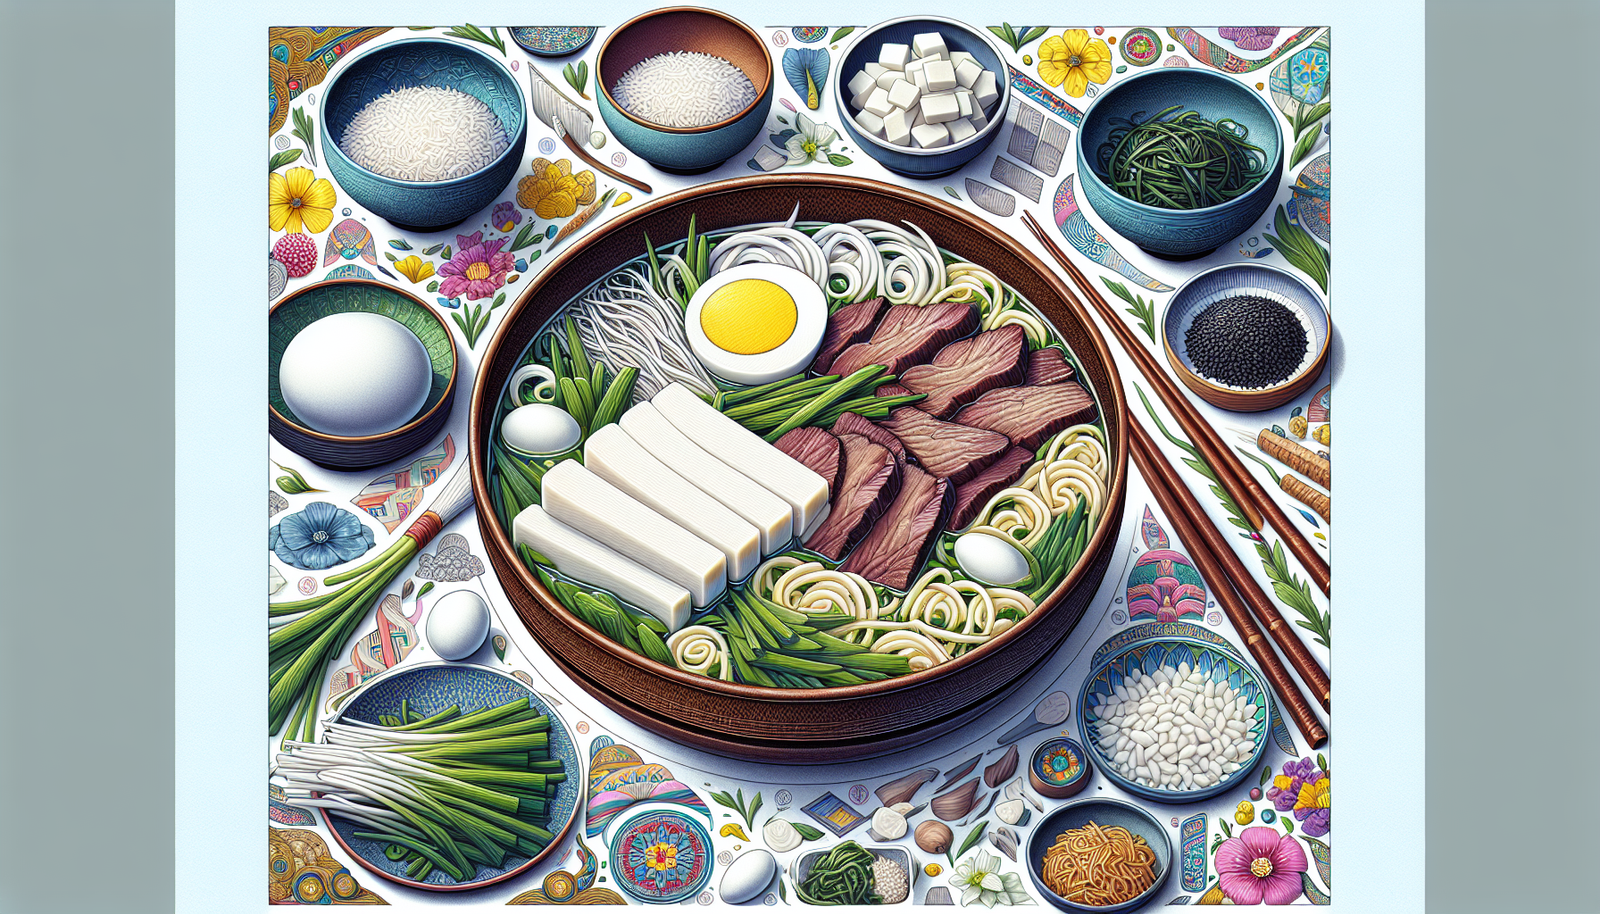 Can You Share Insights Into The Cultural Significance Of The Korean New Years Dish, Tteokguk?